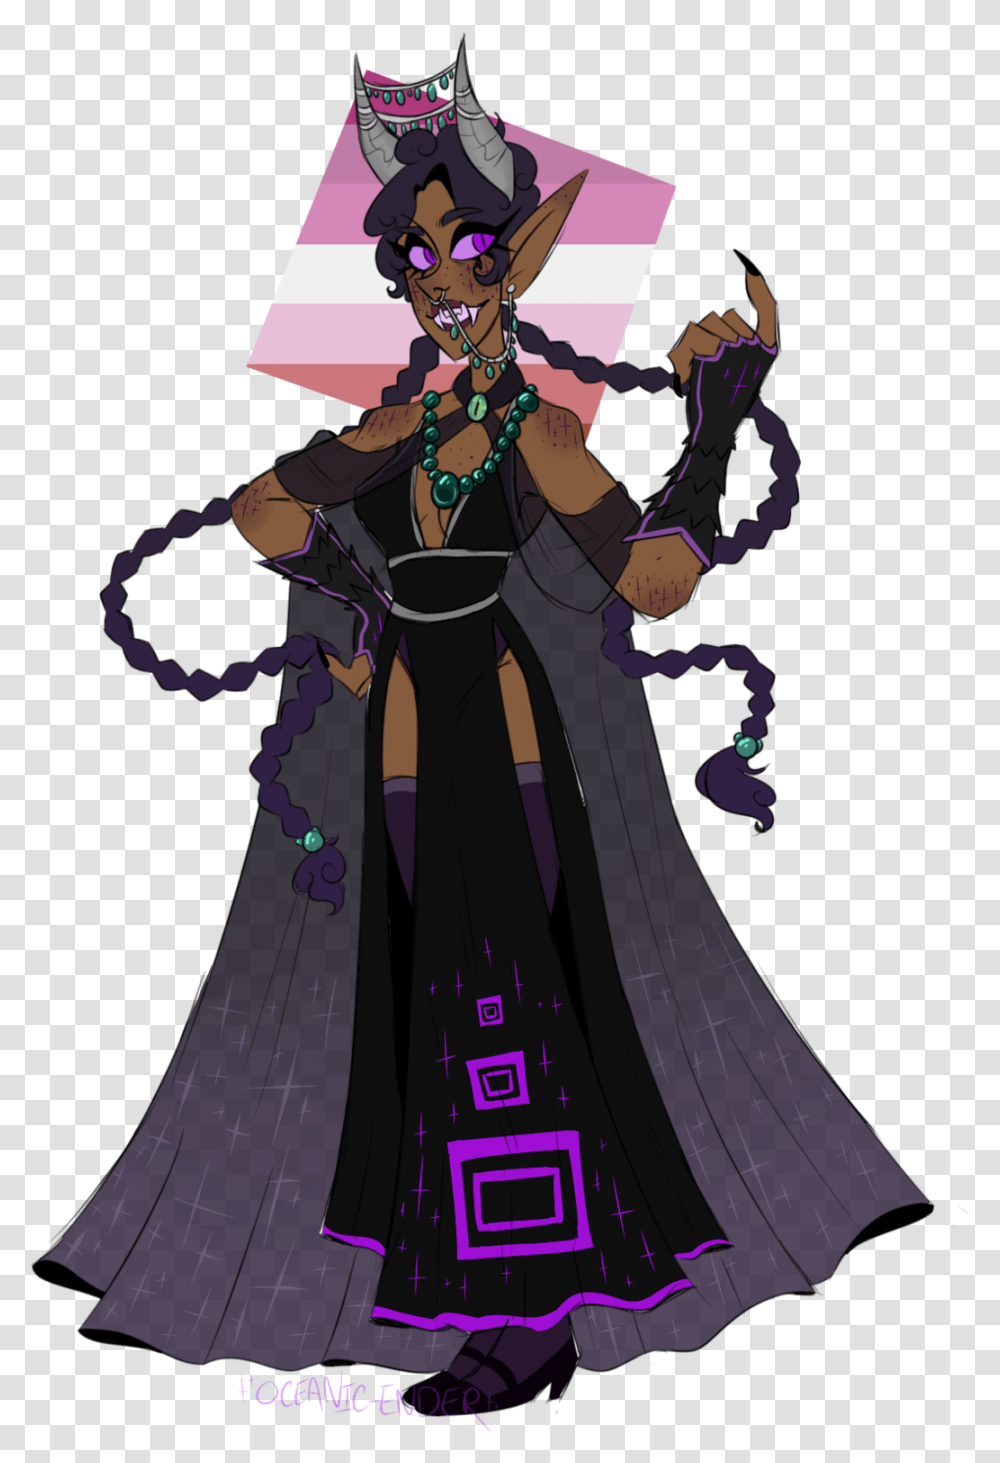 Mmm Tropical - Ender Dragon Lady My Design Of Her Ender Dragon Costume, Person, Clothing, Performer, Magician Transparent Png